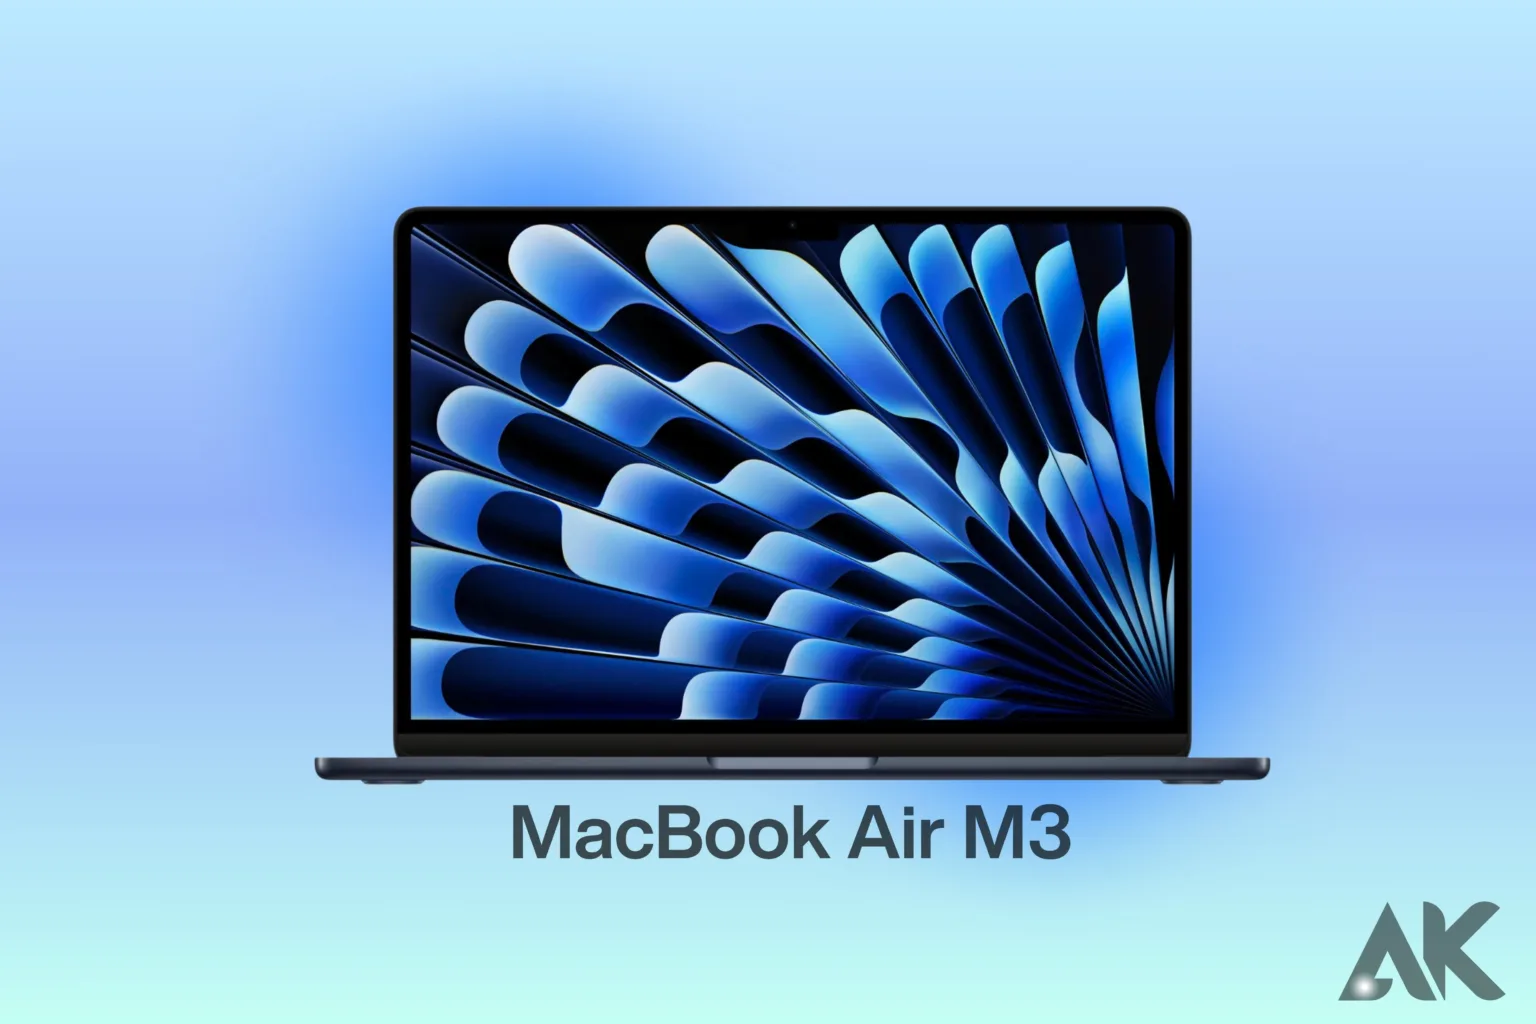 Should I upgrade to the Macbook Air M3 13 inch